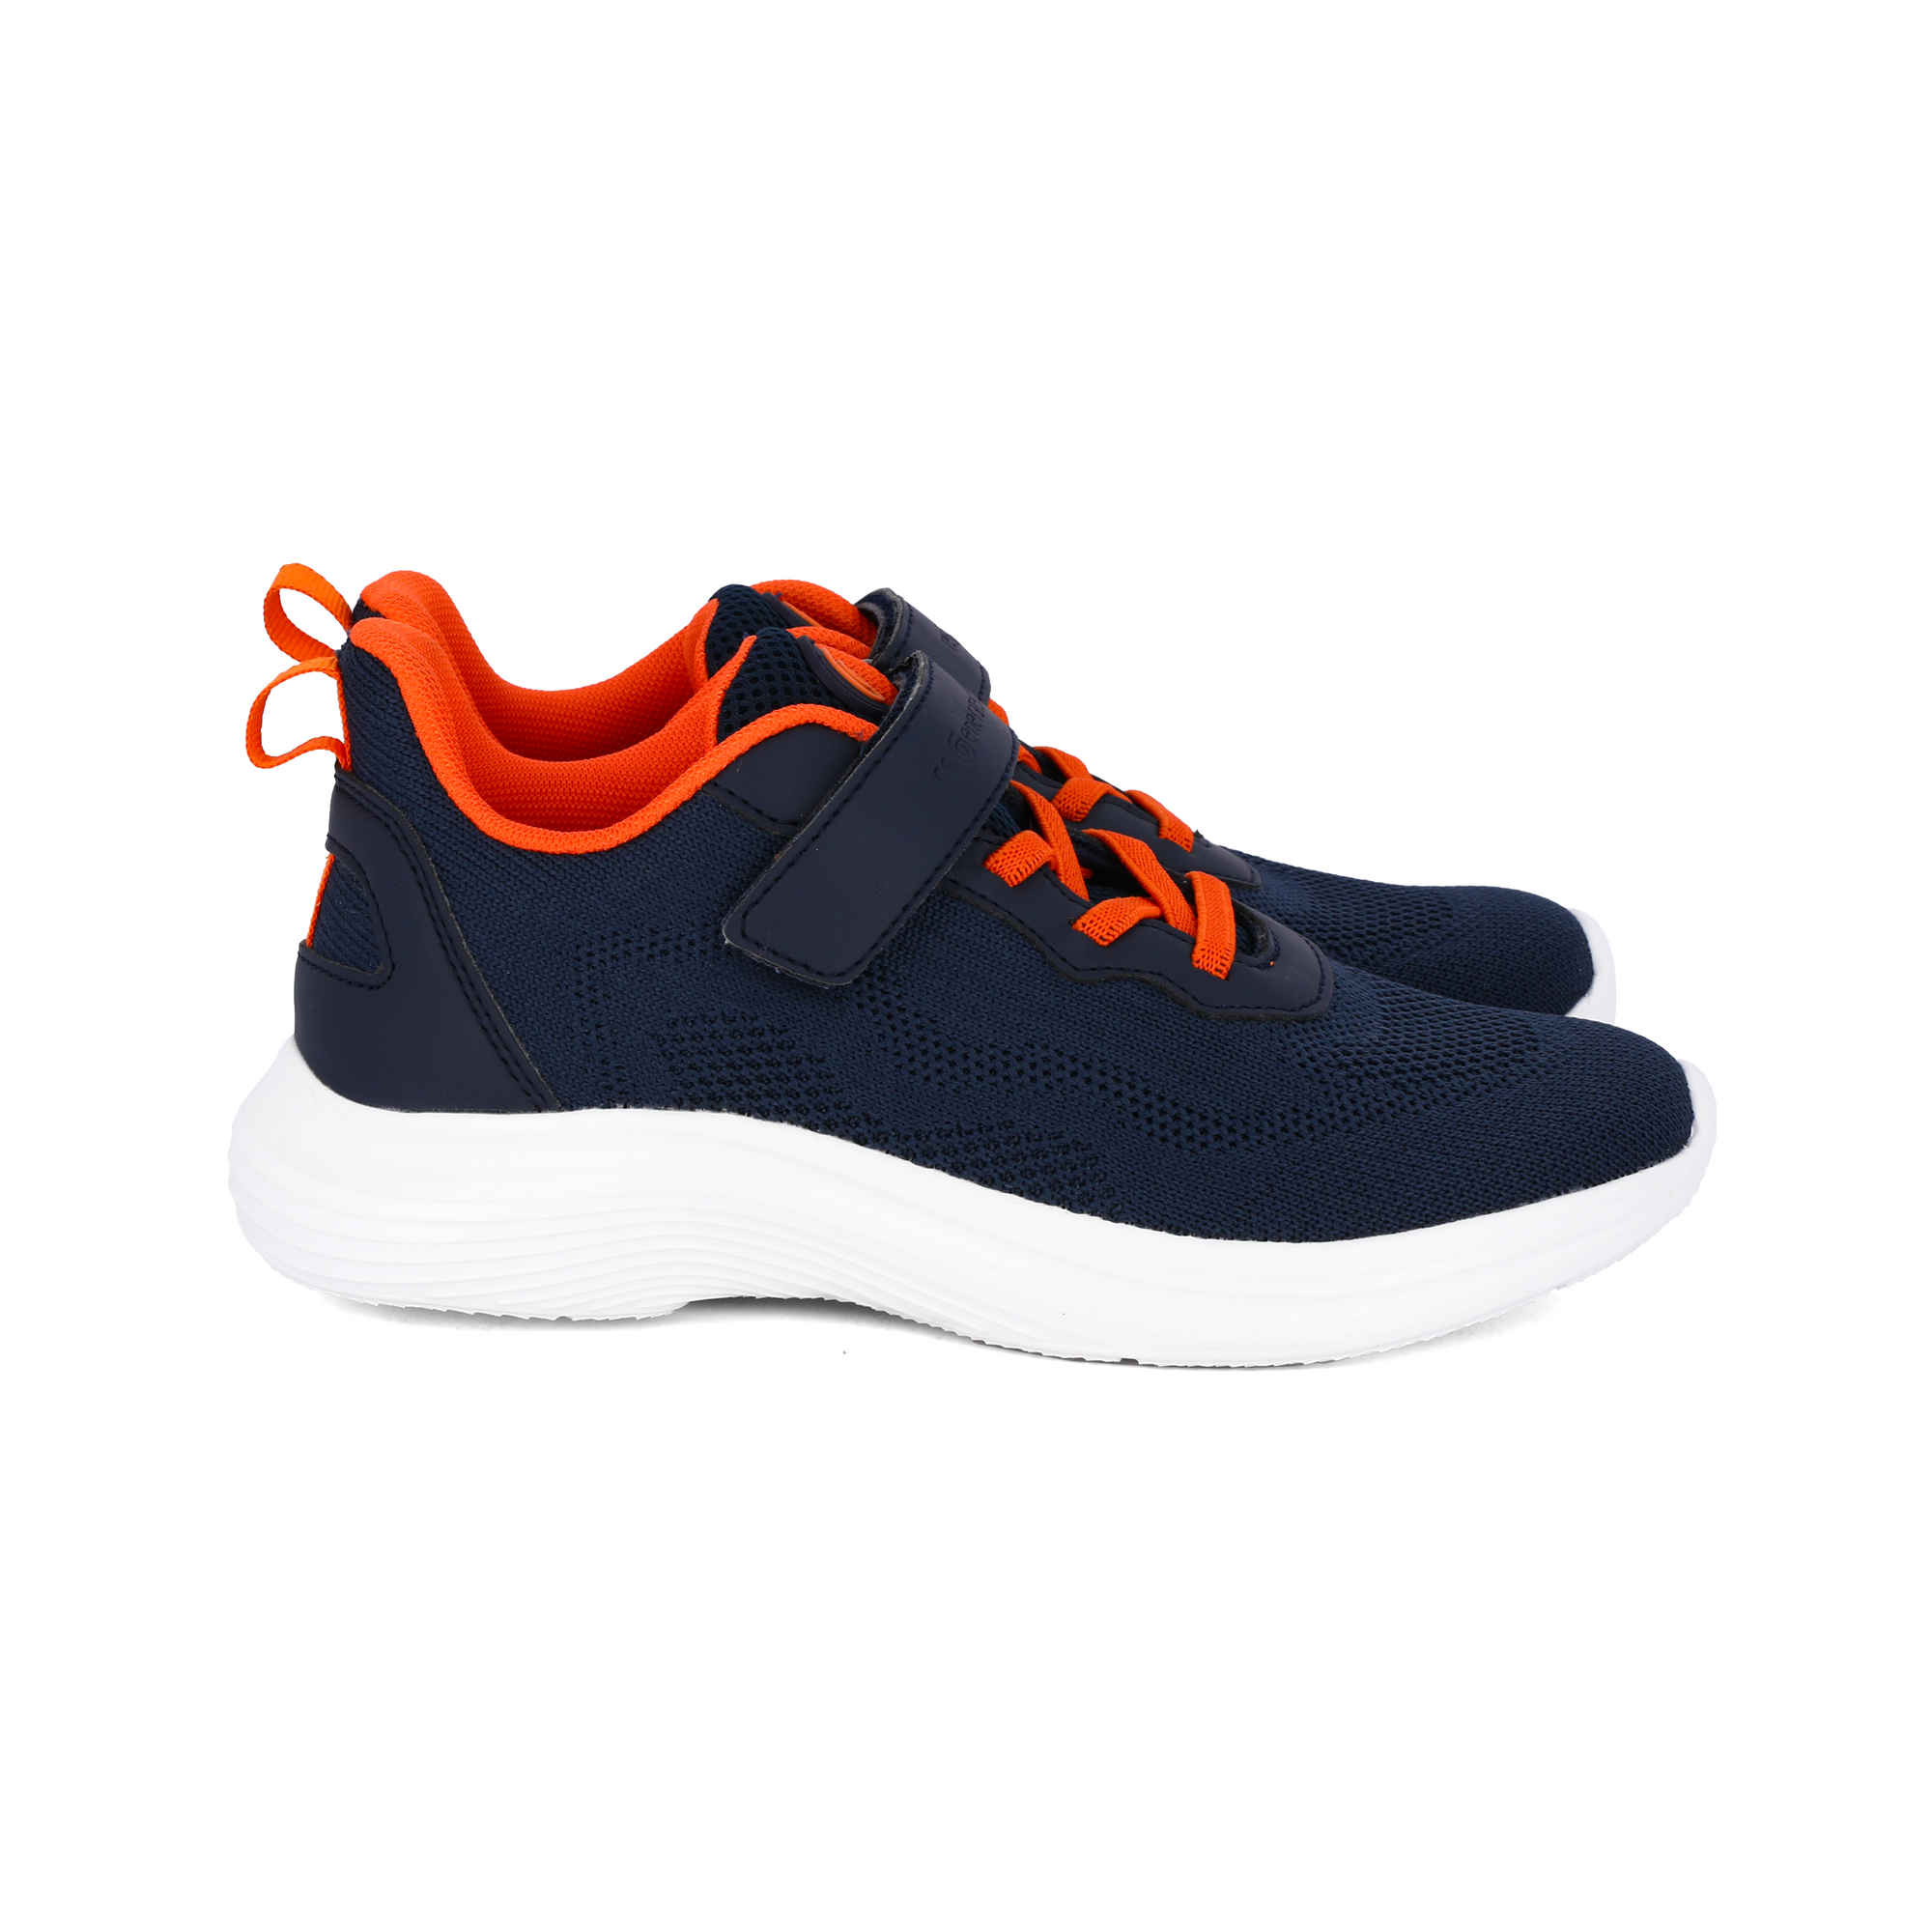 Shoes in Navy and Orange recycled fabric